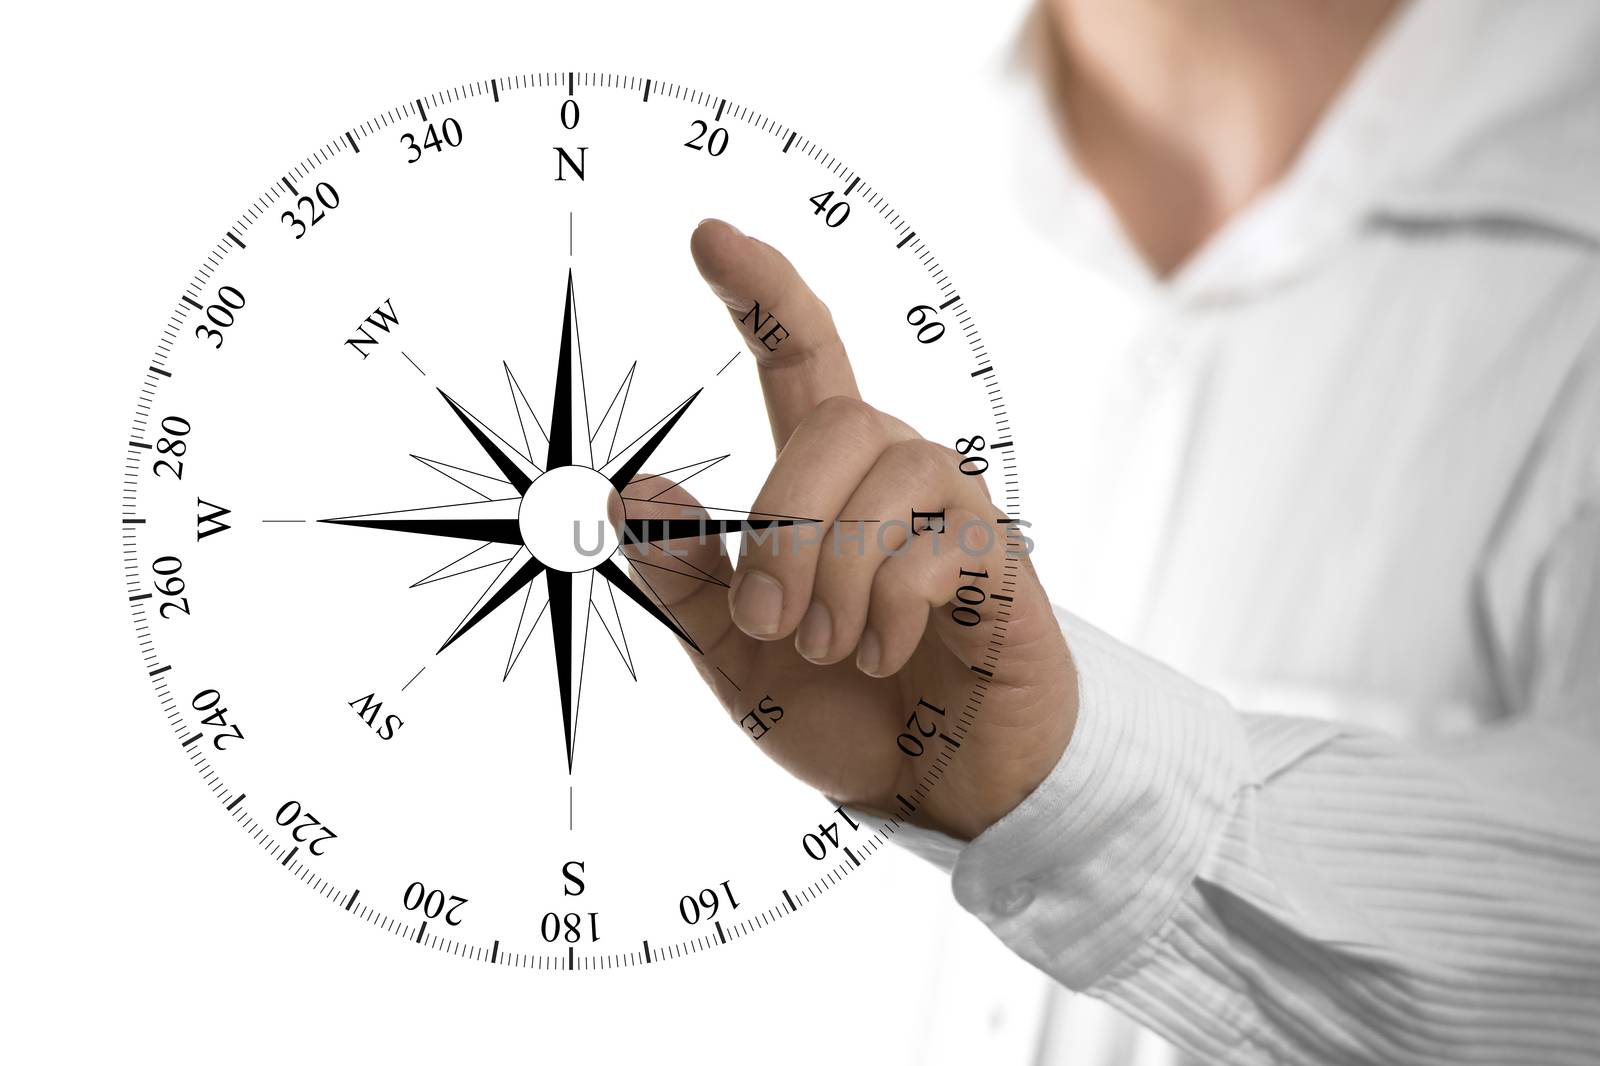 Finger about to touch a compass rose over white background. Concept of orientation.